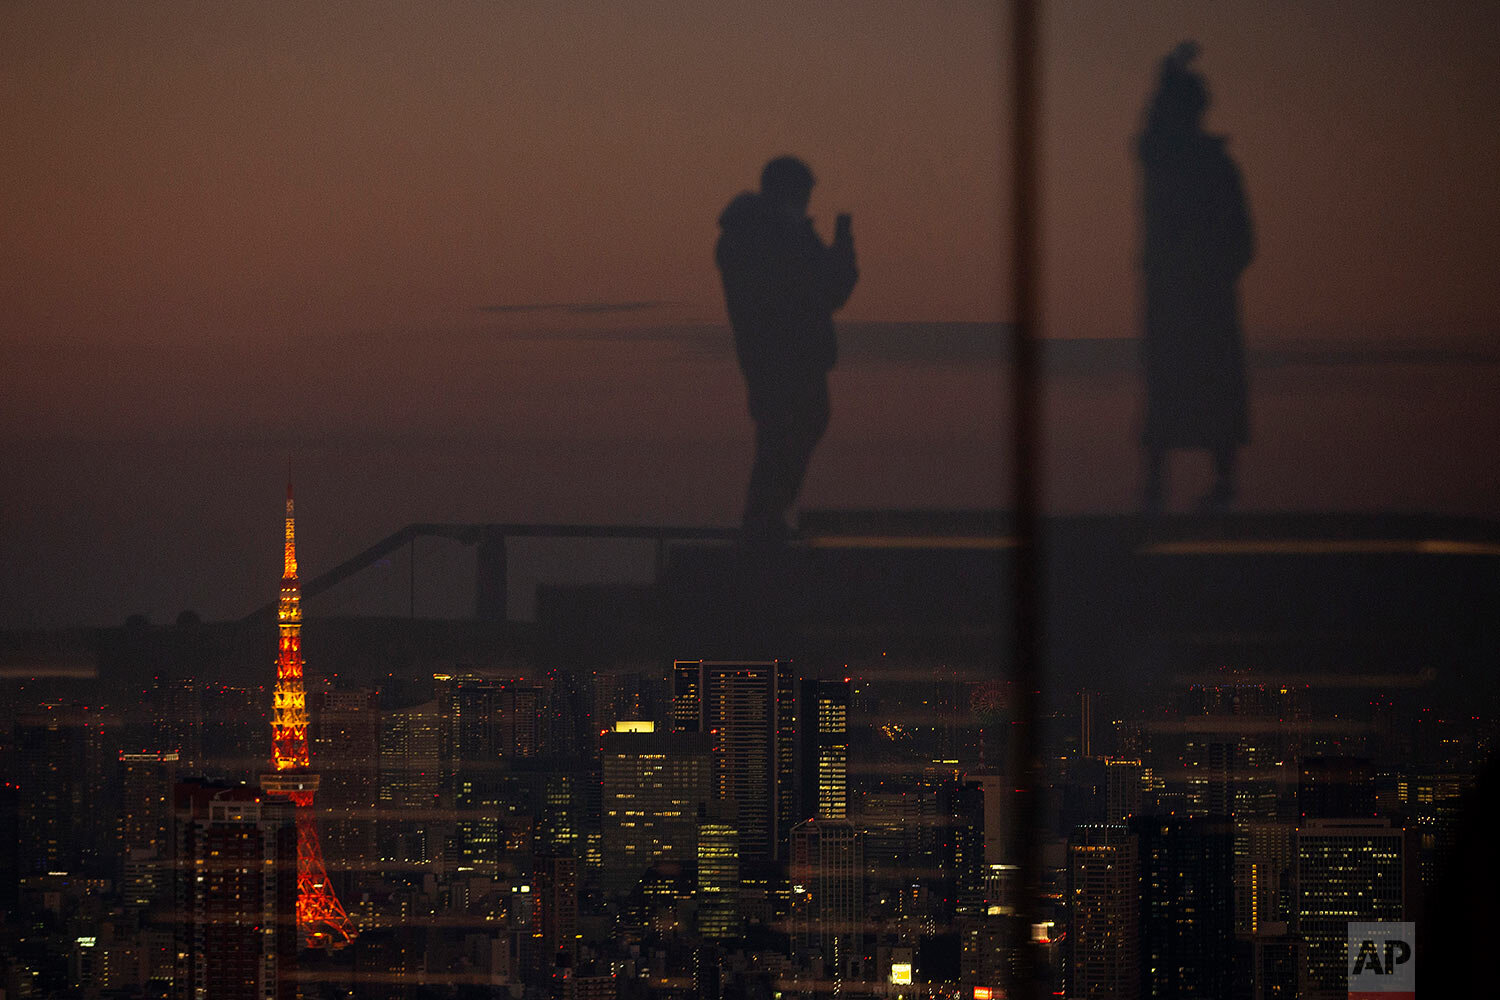  Silhouetted against the warm sunset skyline and the illuminated Tokyo Tower, visitors are reflected on the glass walls of a rooftop observation deck Thursday, Jan. 21, 2021, in Tokyo. (AP Photo/Kiichiro Sato) 